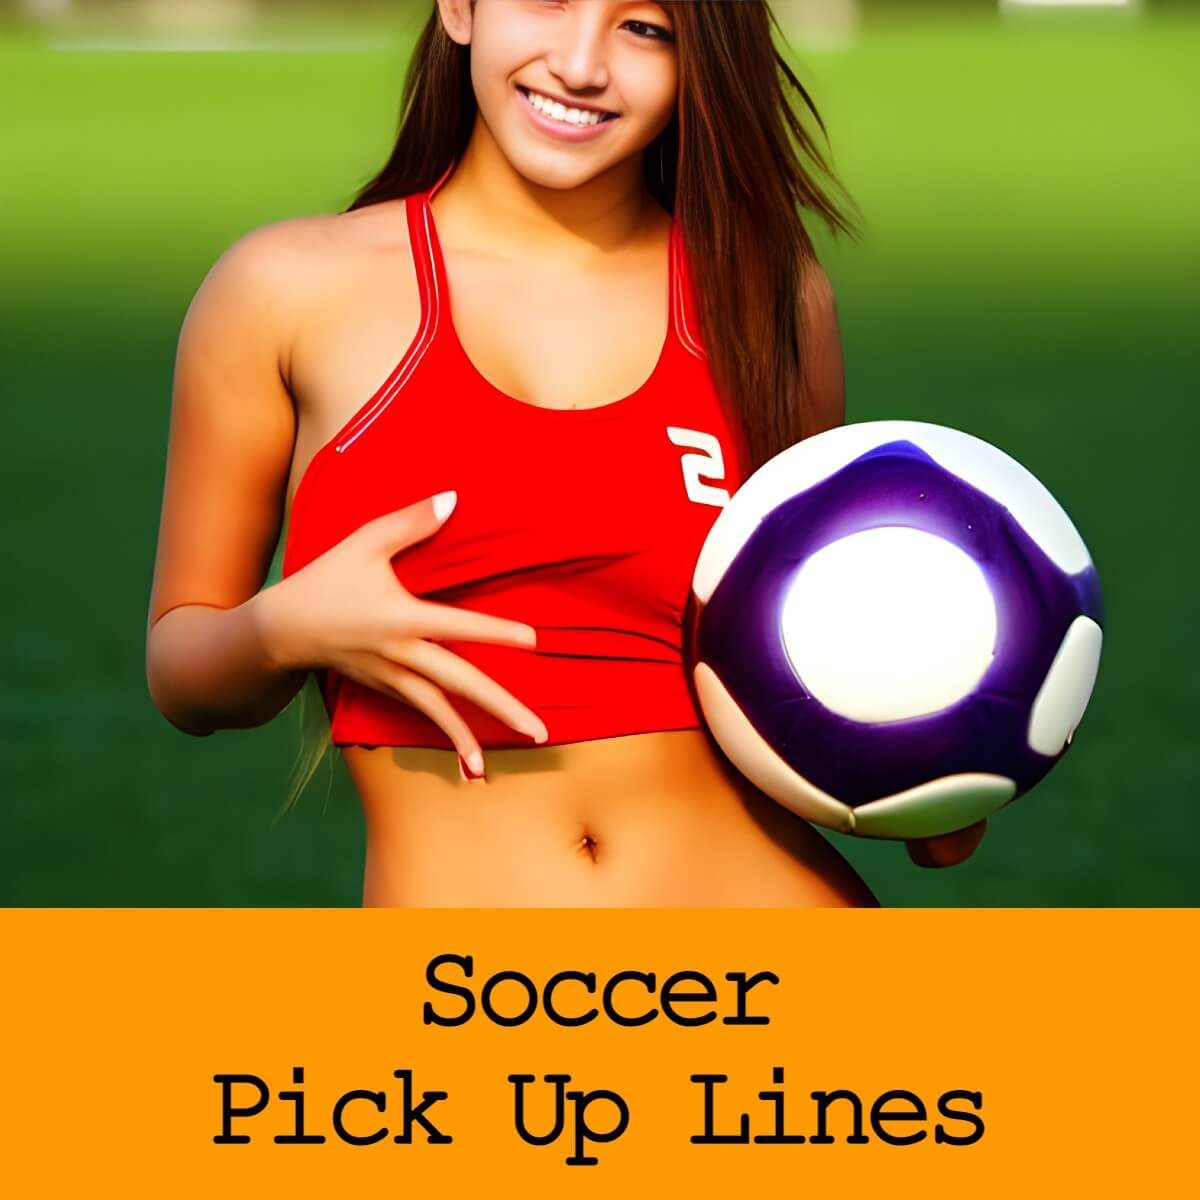 53 Soccer (Football) Pick Up Lines [Funny, Dirty, Cheesy]